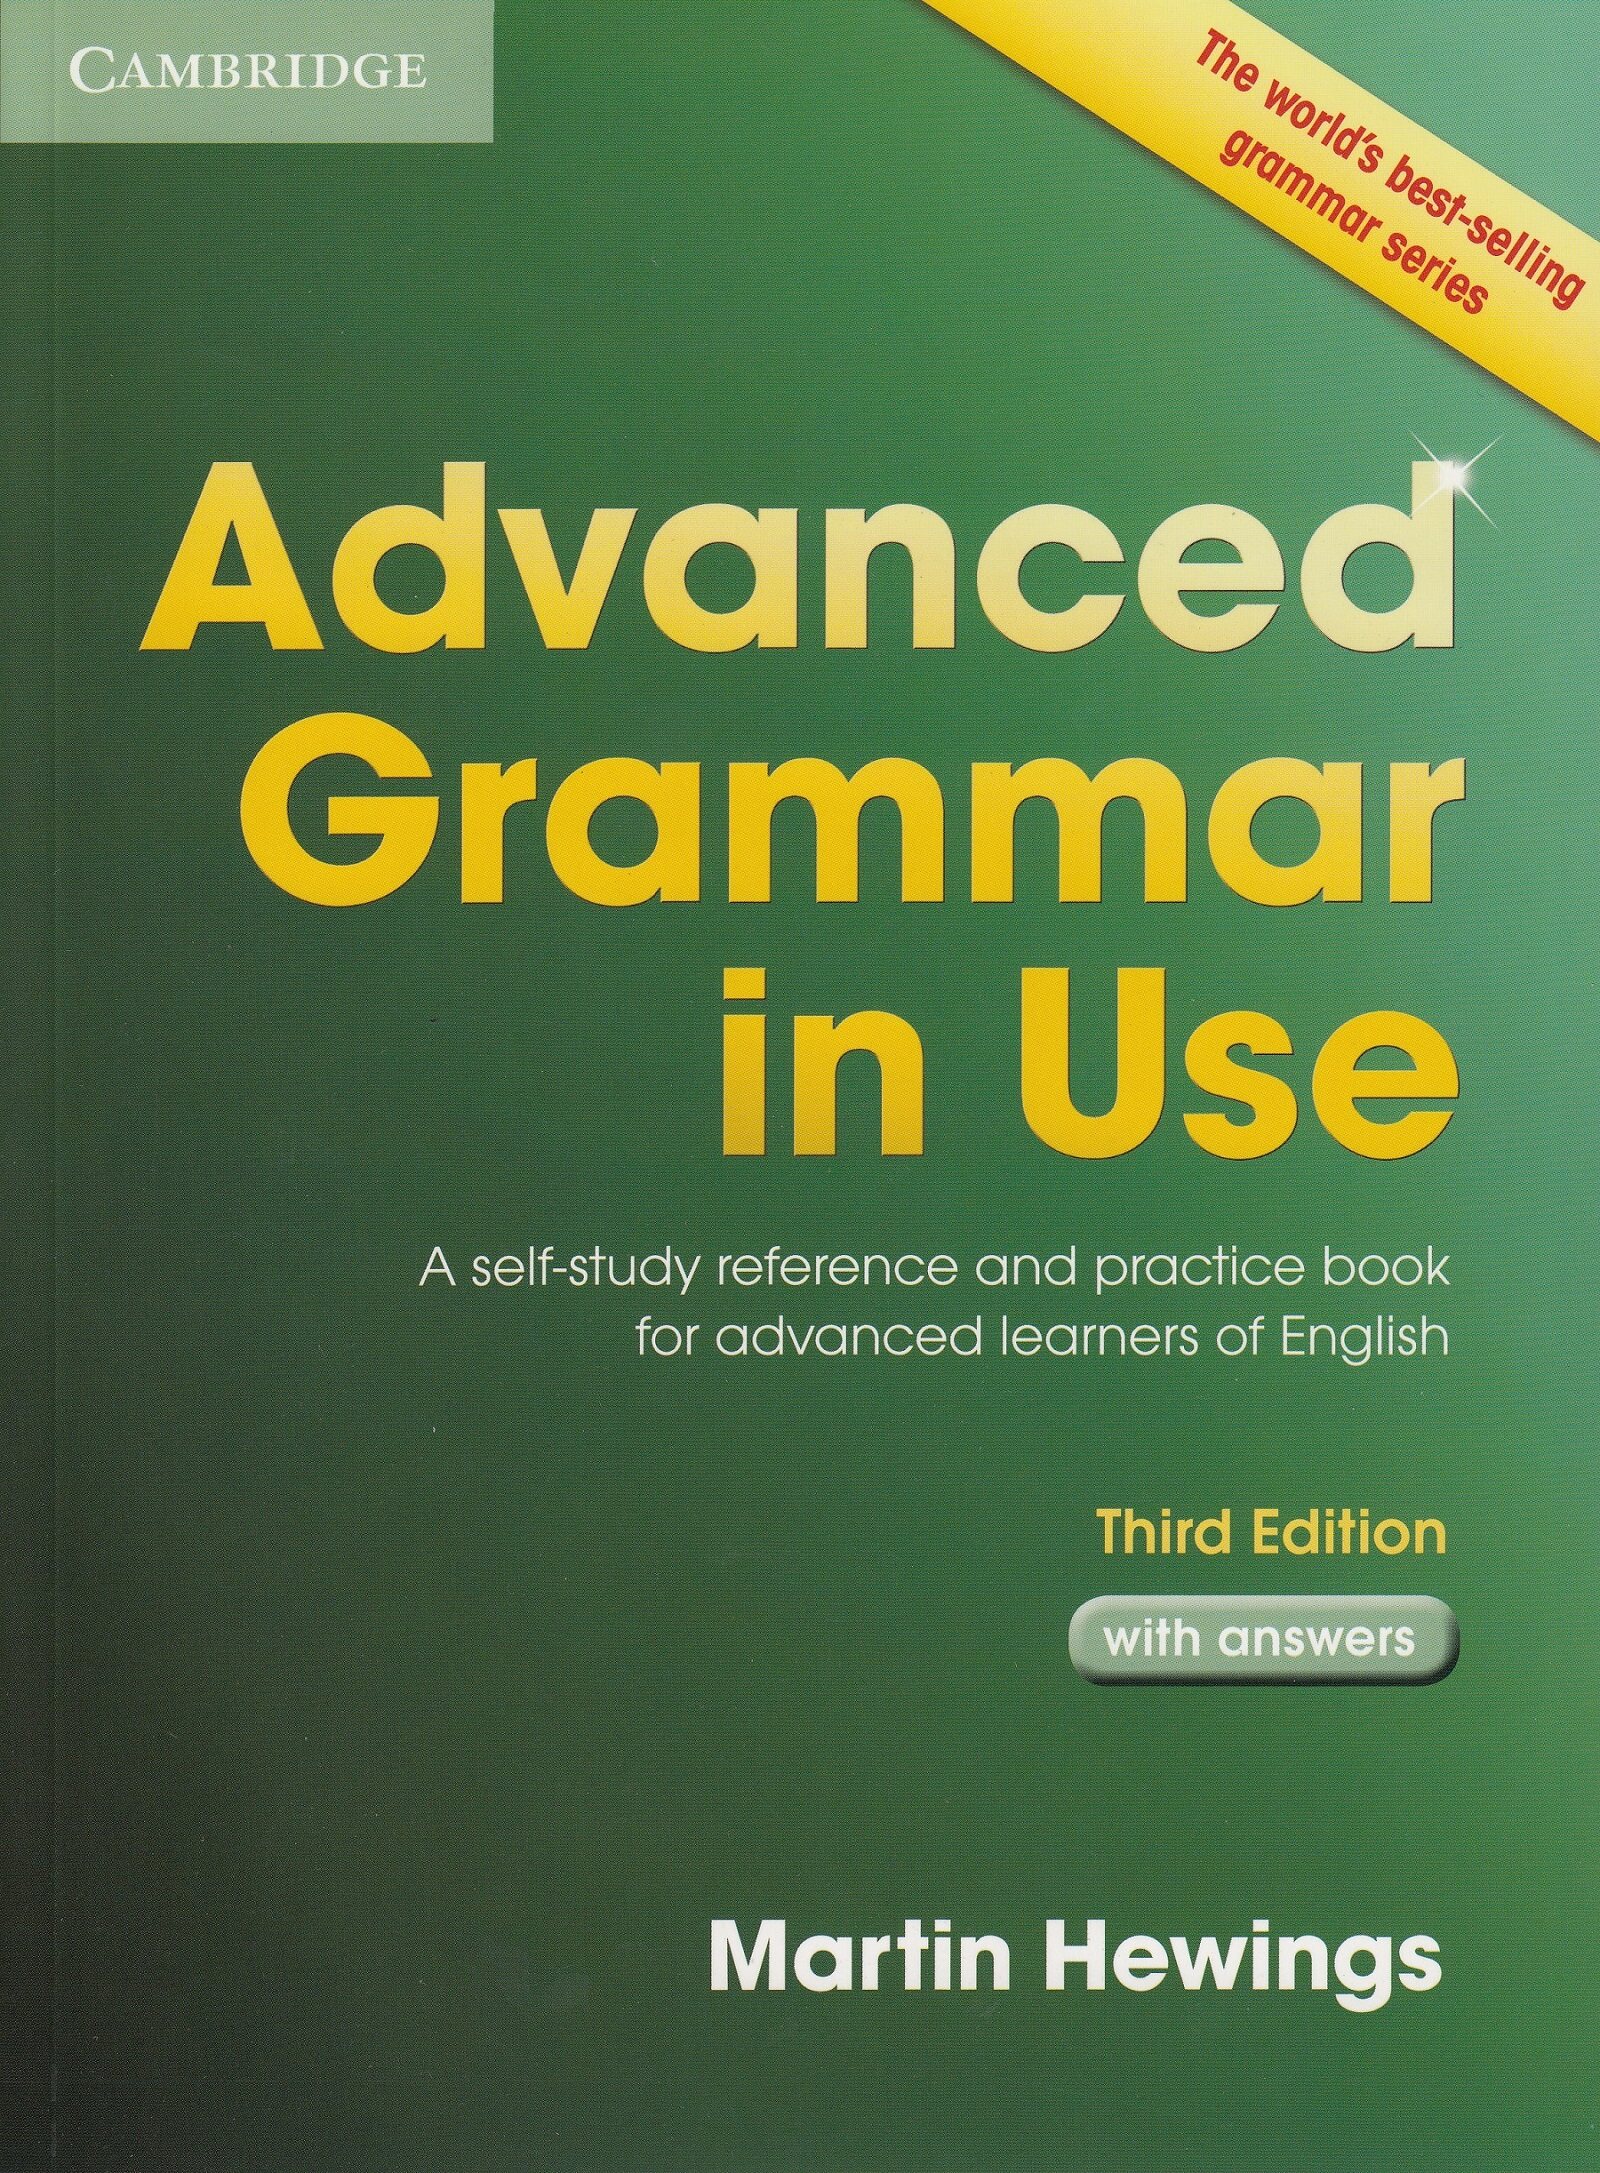 ADVANCED GRAMMAR IN USE WITH ANSWER (3ED)  by DK TODAY